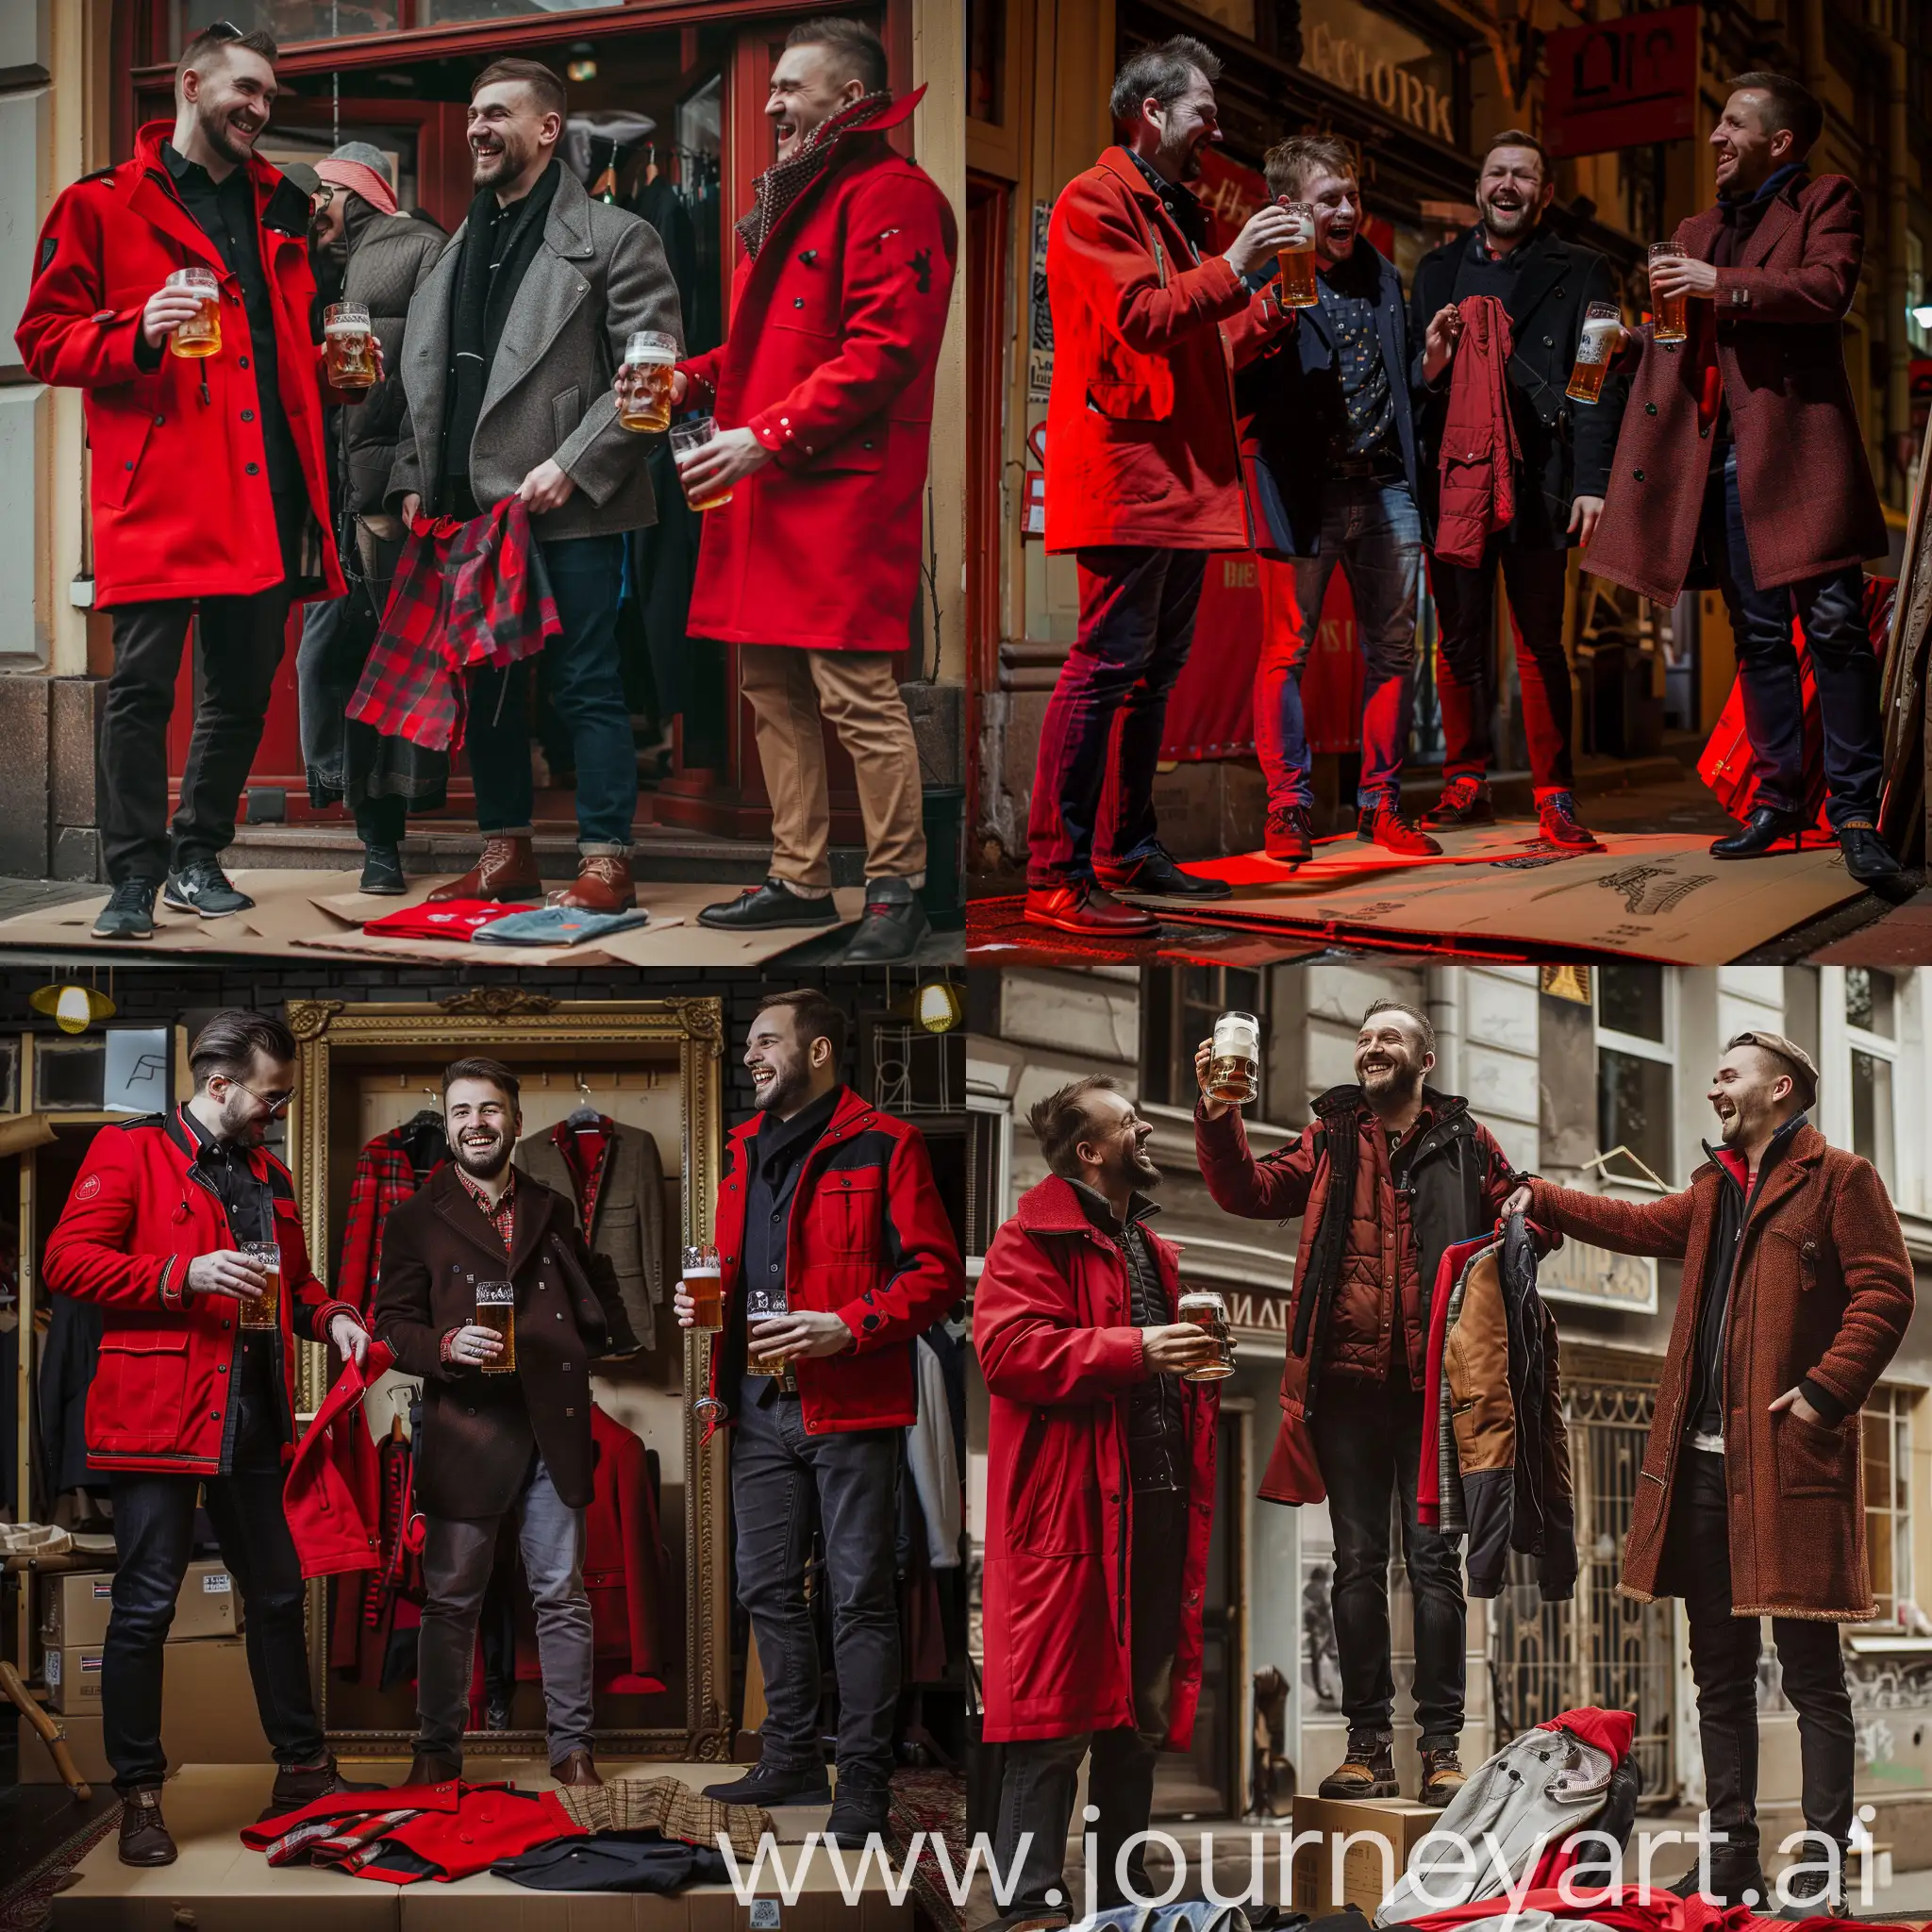 Stylish-Men-Enjoying-Vintage-Shopping-with-Beer-in-Dramatic-Red-and-Black-Setting